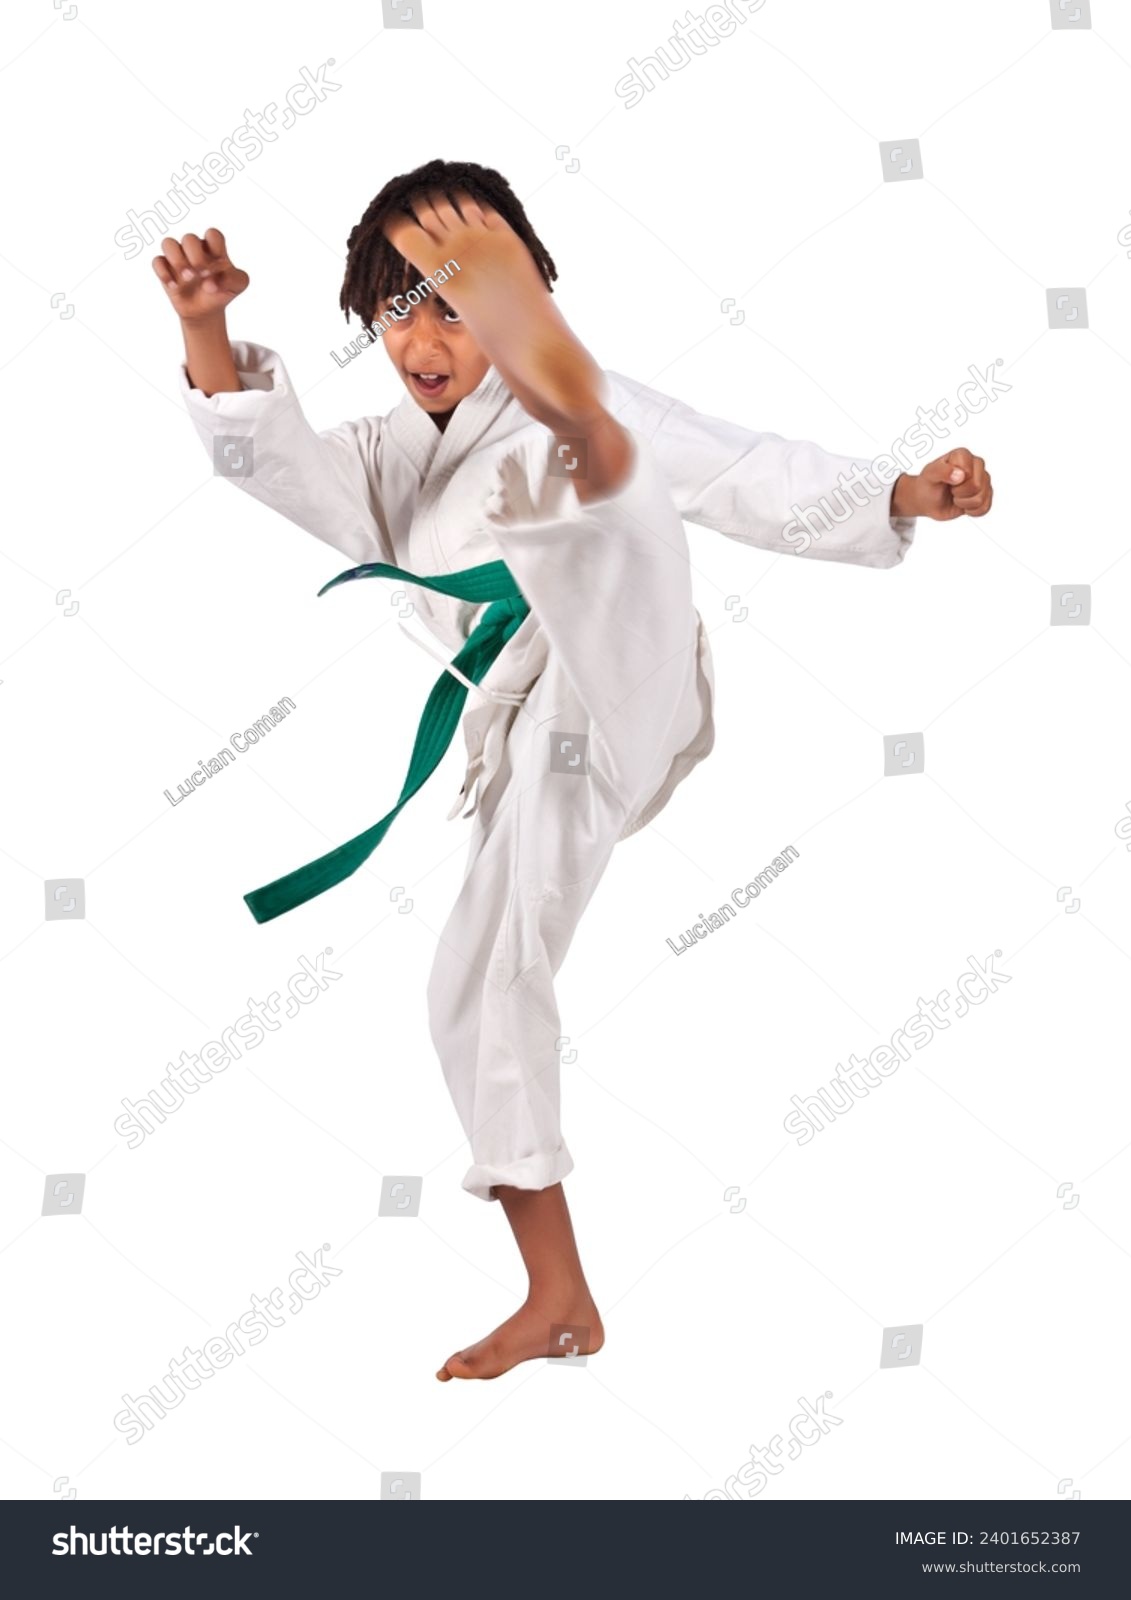 african american boy in karate suit training, mixed race , uniform karate gi , keikogi or dogi, suit is white, he is mixed race with braids, dreadlocks, isolated on white background #2401652387